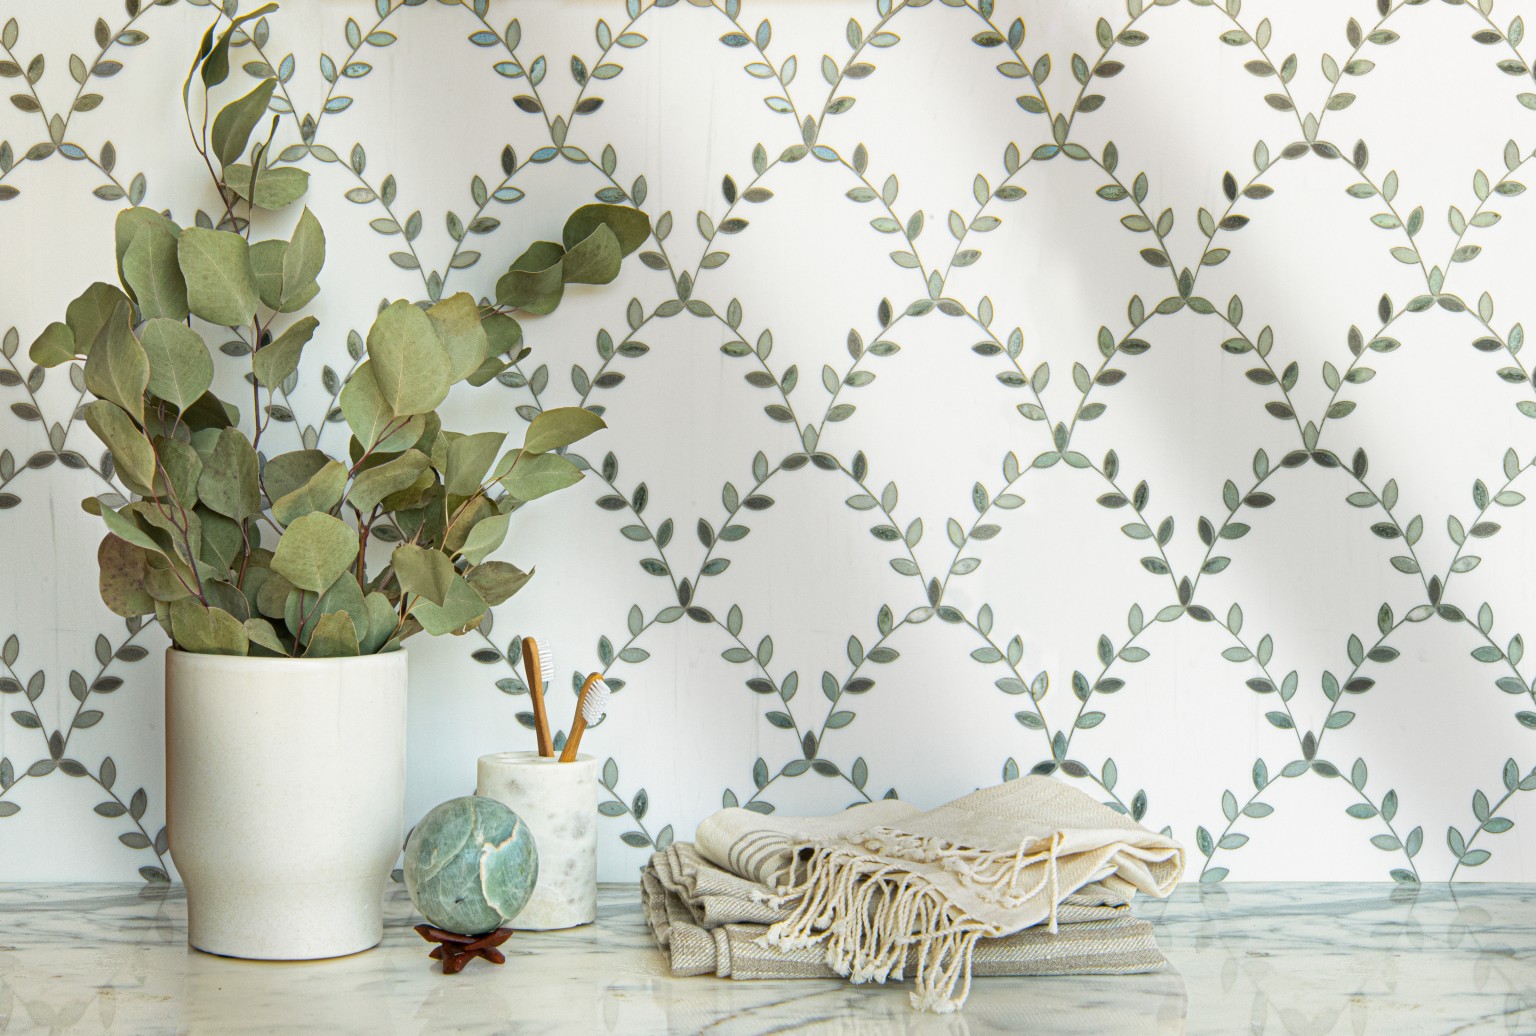 2022 Tile Trends, According to the Pros - Colorado Homes & Lifestyles